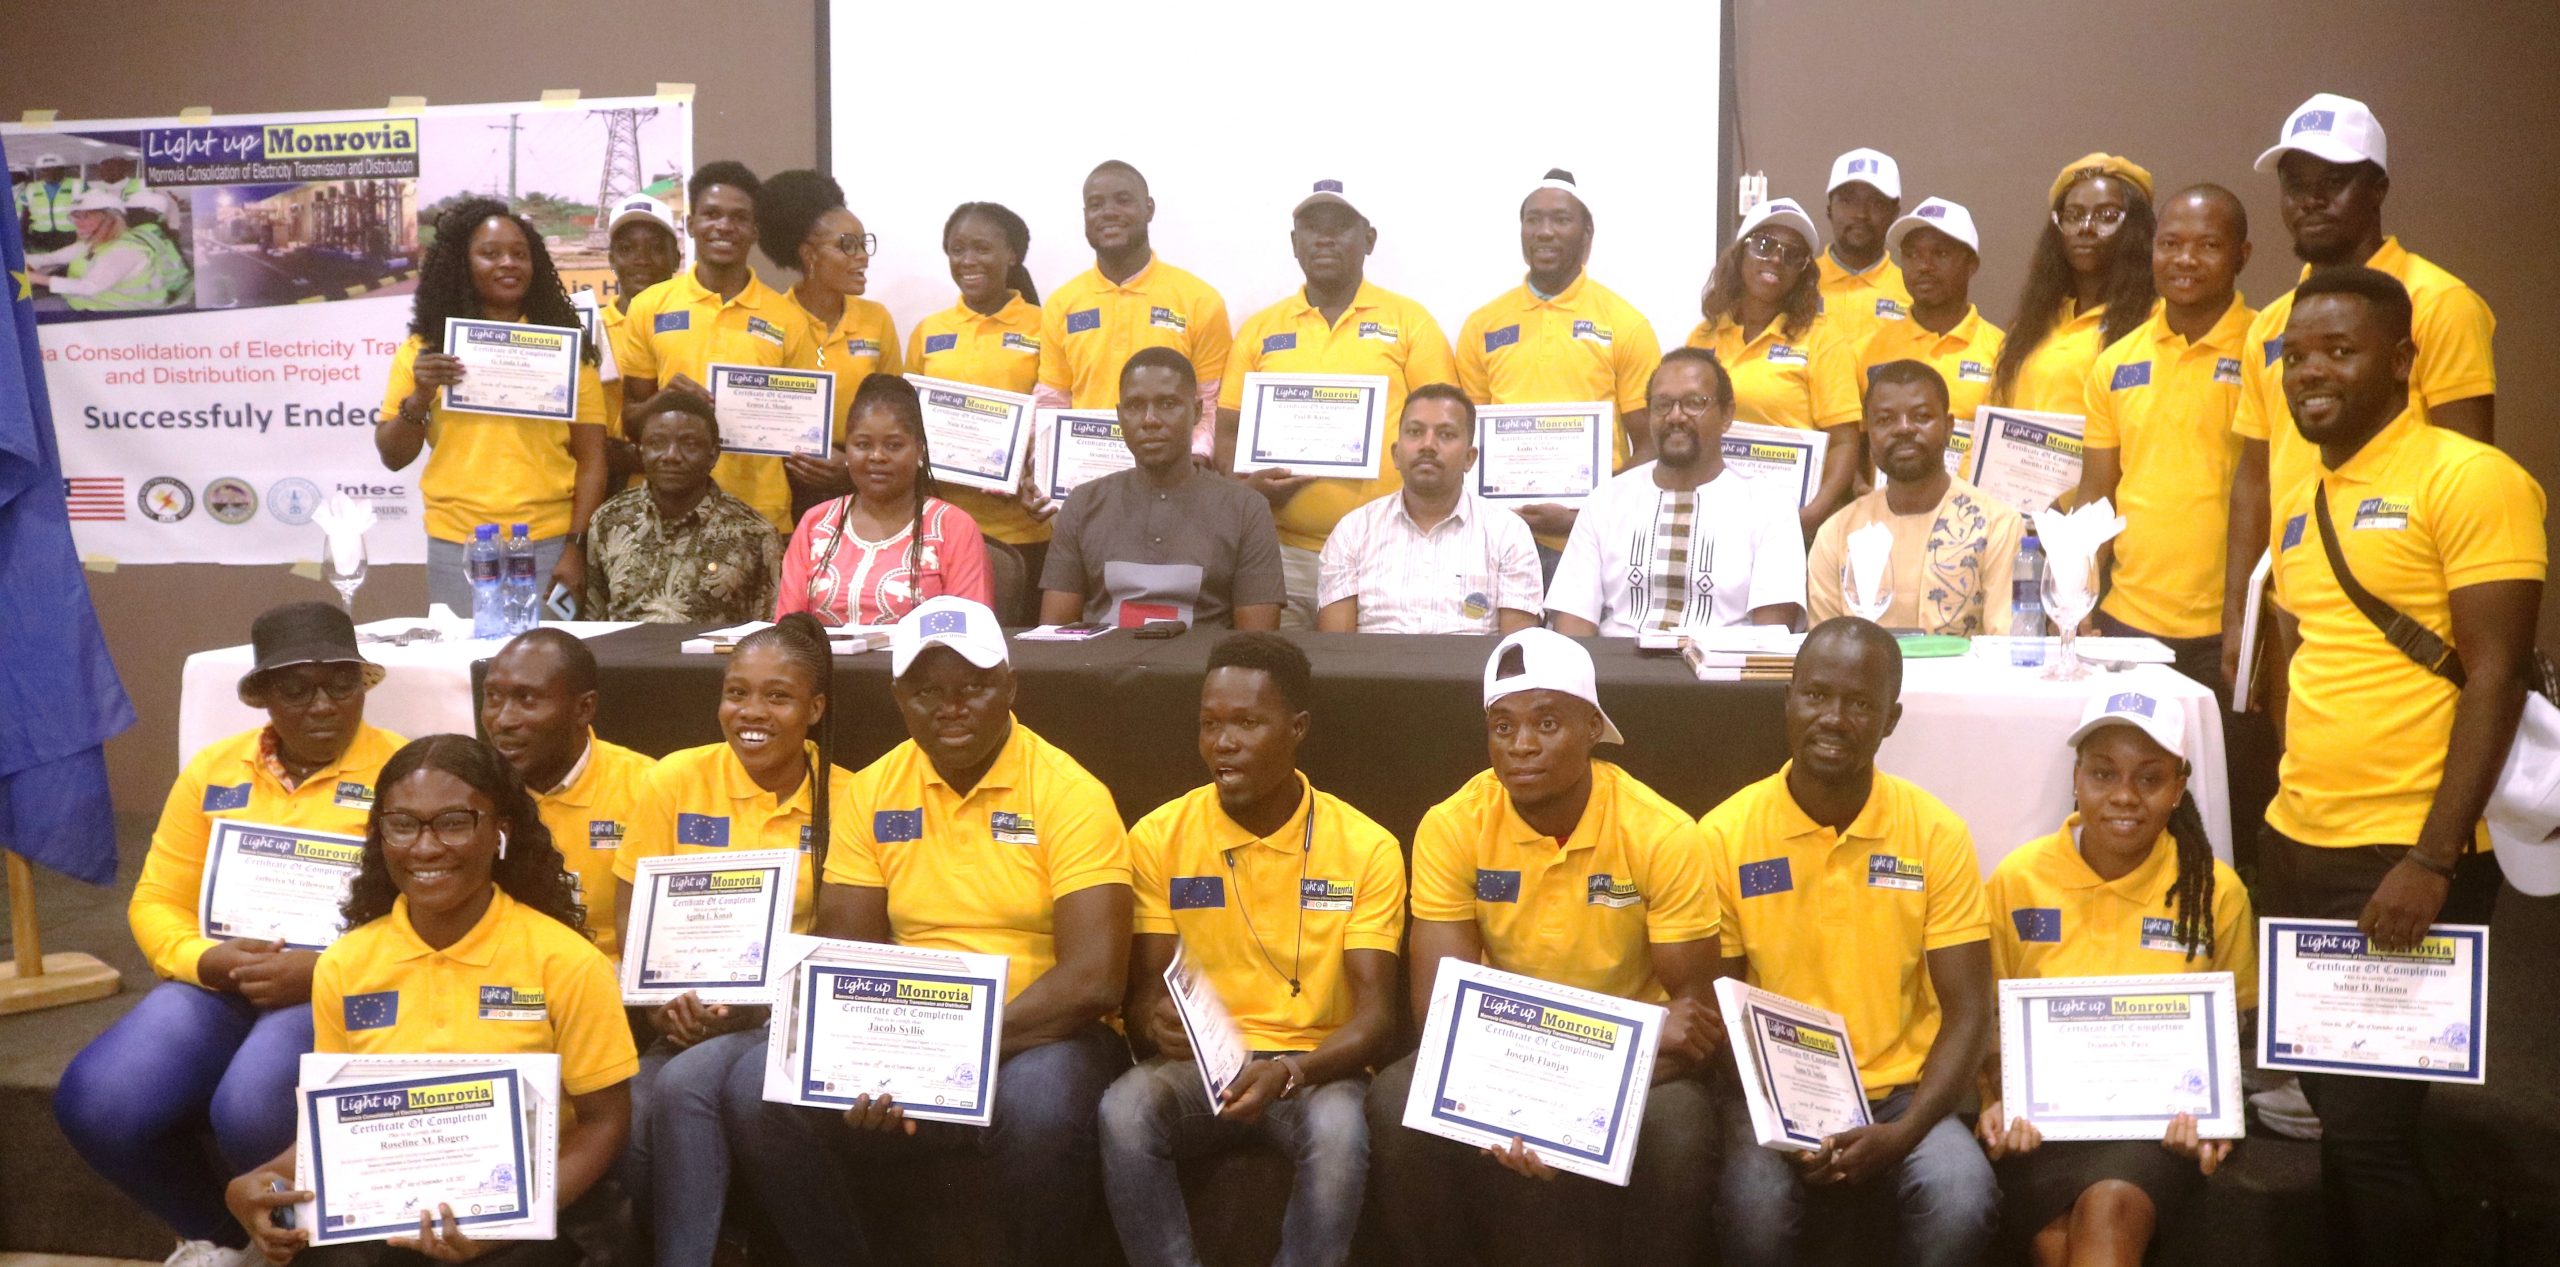 Interns awarded certificates